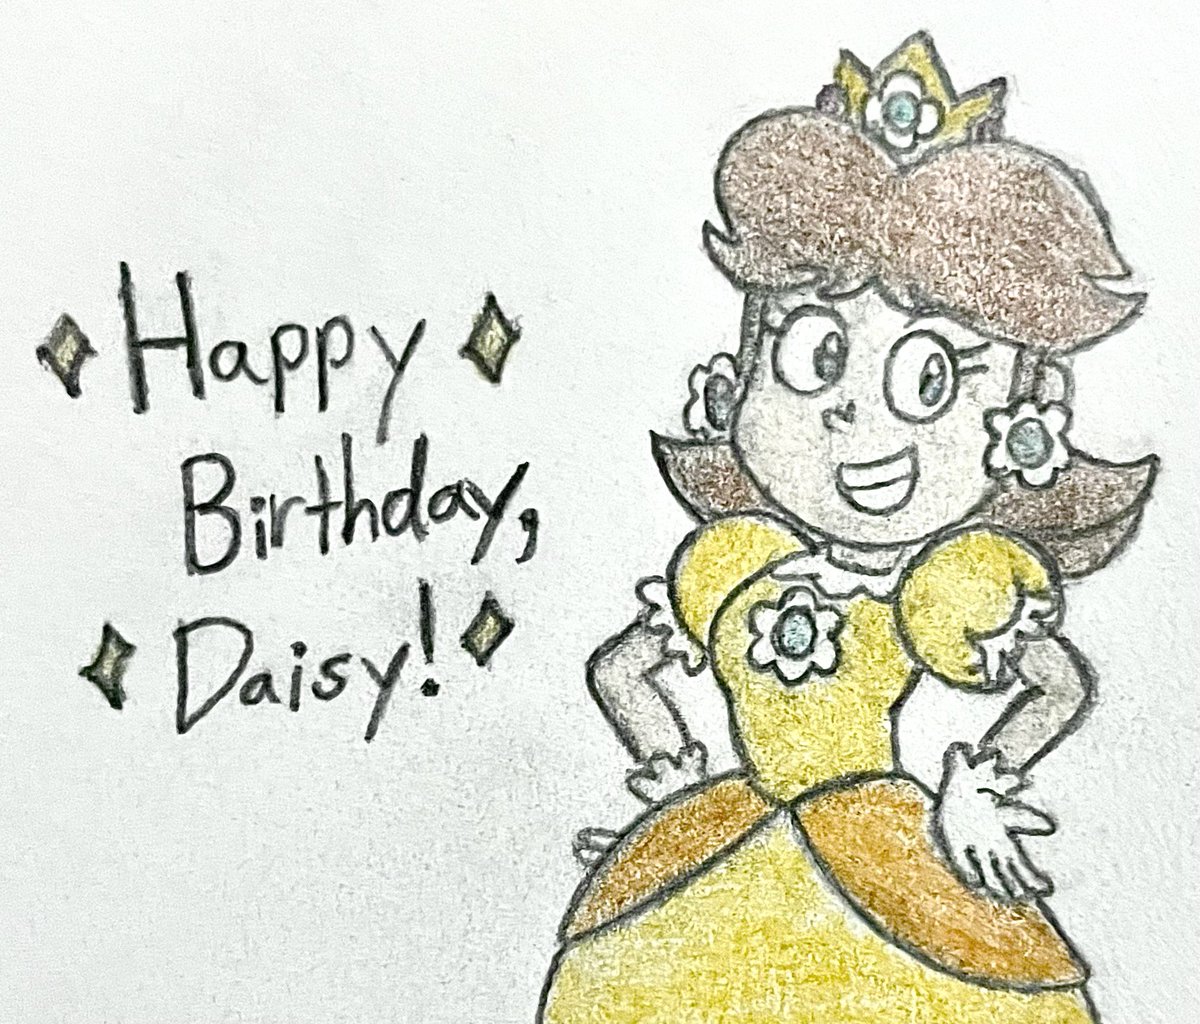 Happy birthday to Princess Daisy, who debuted in Super Mario Land on the Game Boy! 🥳 #PrincessDaisy #Daisy #SuperMarioLand #GameBoy #Nintendo #Birthday #Anniversary #Gift